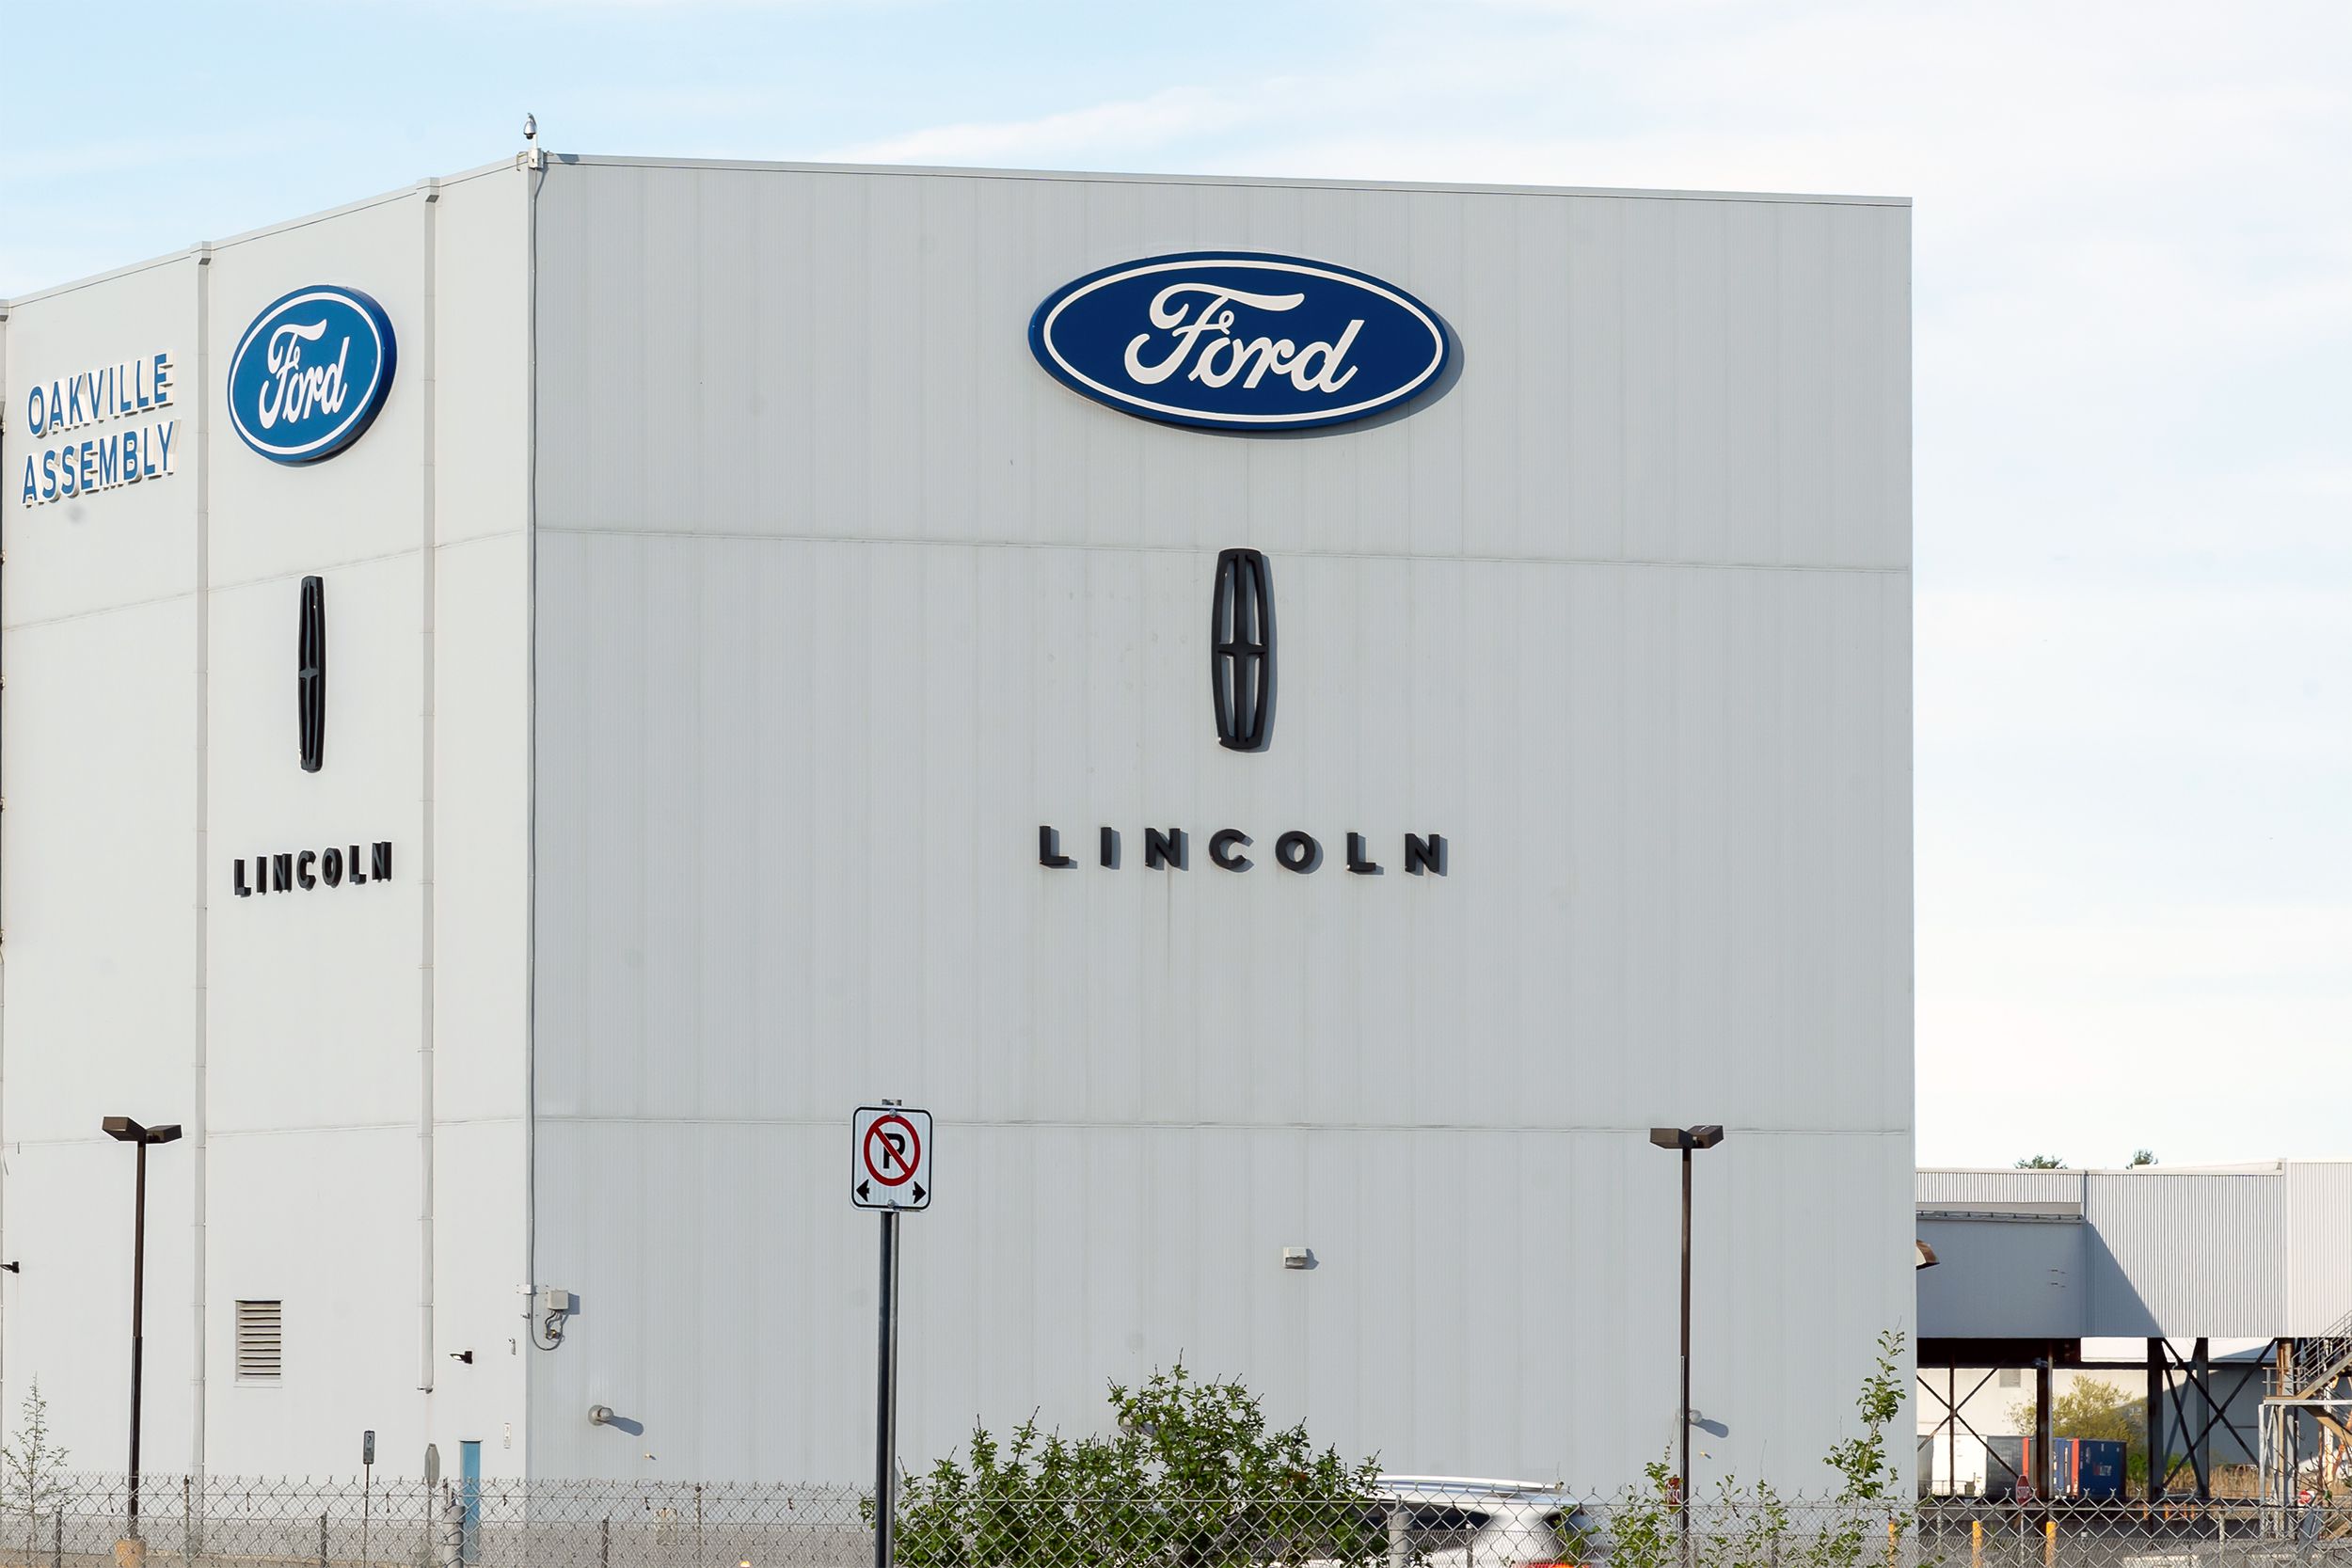 <p>While there are plenty of well-known companies that specialize in manufacturing RVs, <a href="https://money.cnn.com/2017/07/12/news/economy/rv-industry-comeback/index.html">Ford Motor Co. also has a part to play</a> in the creation of these vehicles. It makes the chassis, engines, and transmissions for most of the motorhomes bought in this country.</p>